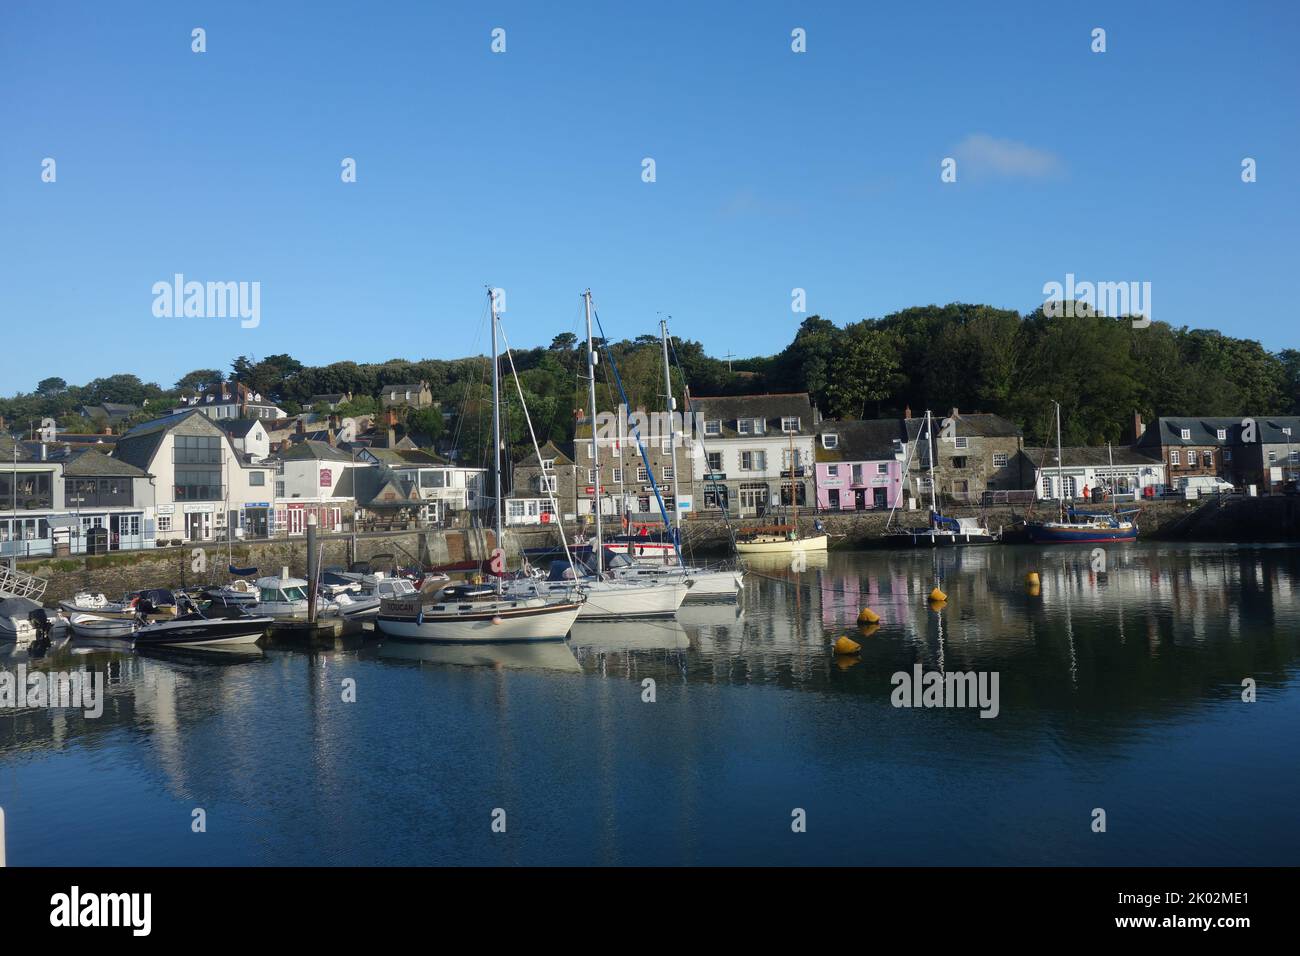 Padstow Harbour, Padstow, Cornwall, UK Stock Photo